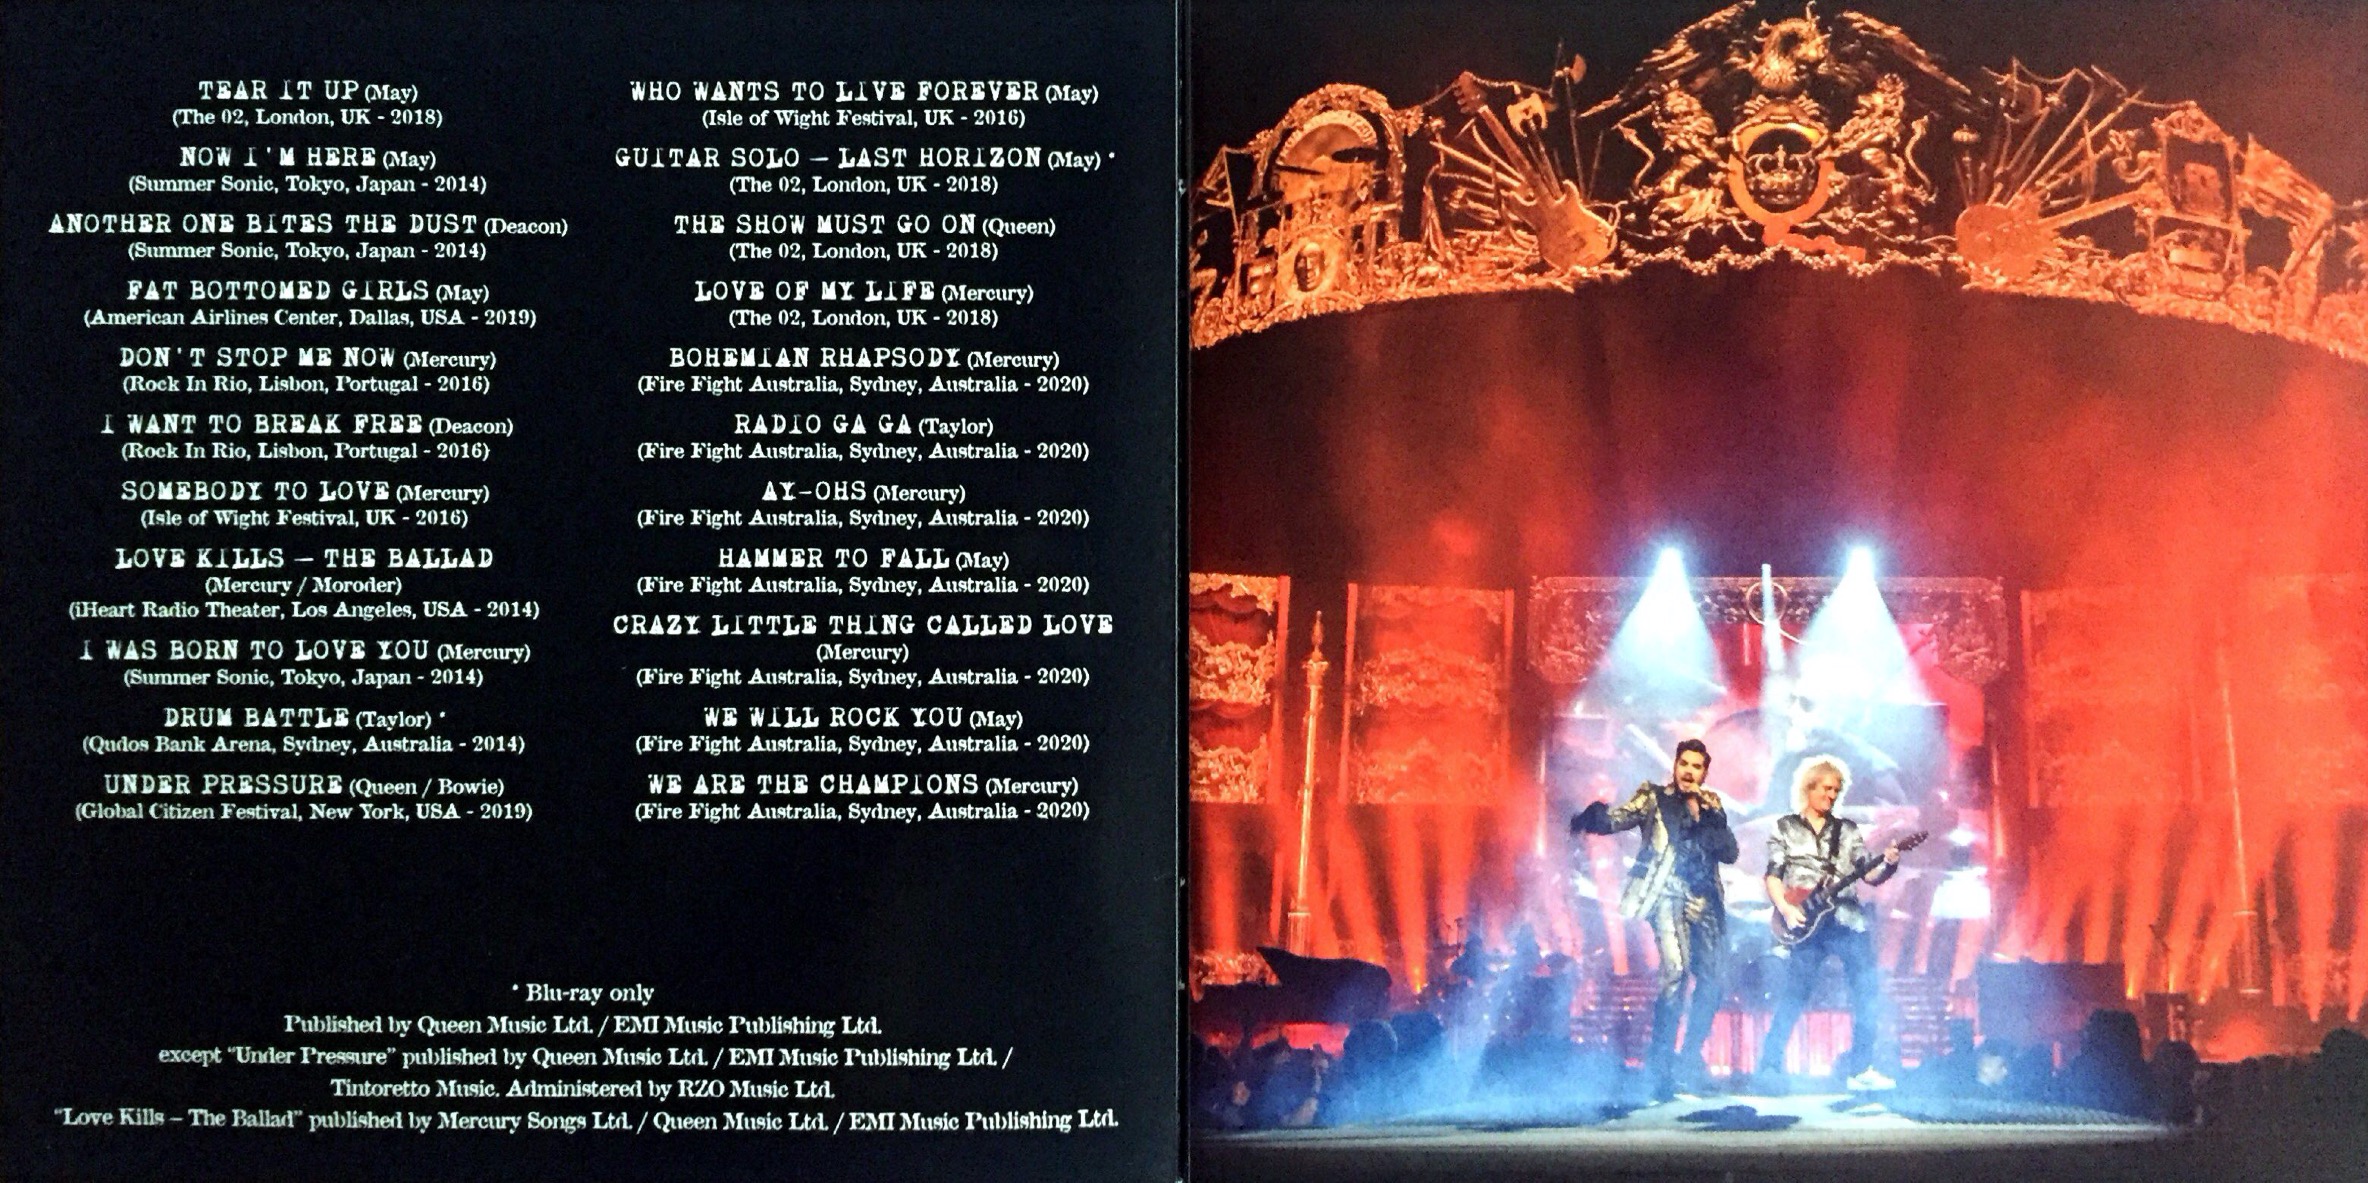 2-page spread from the Live Around The World album booklet by Queen and Adam Lambert. The left page shows the track listing, while the right page shows a photo of the band performing ons stage, spotlights shining down on all 3 members. High above them, a large and very ornate golden archway spans the stage, with the Queen crest in the centre.